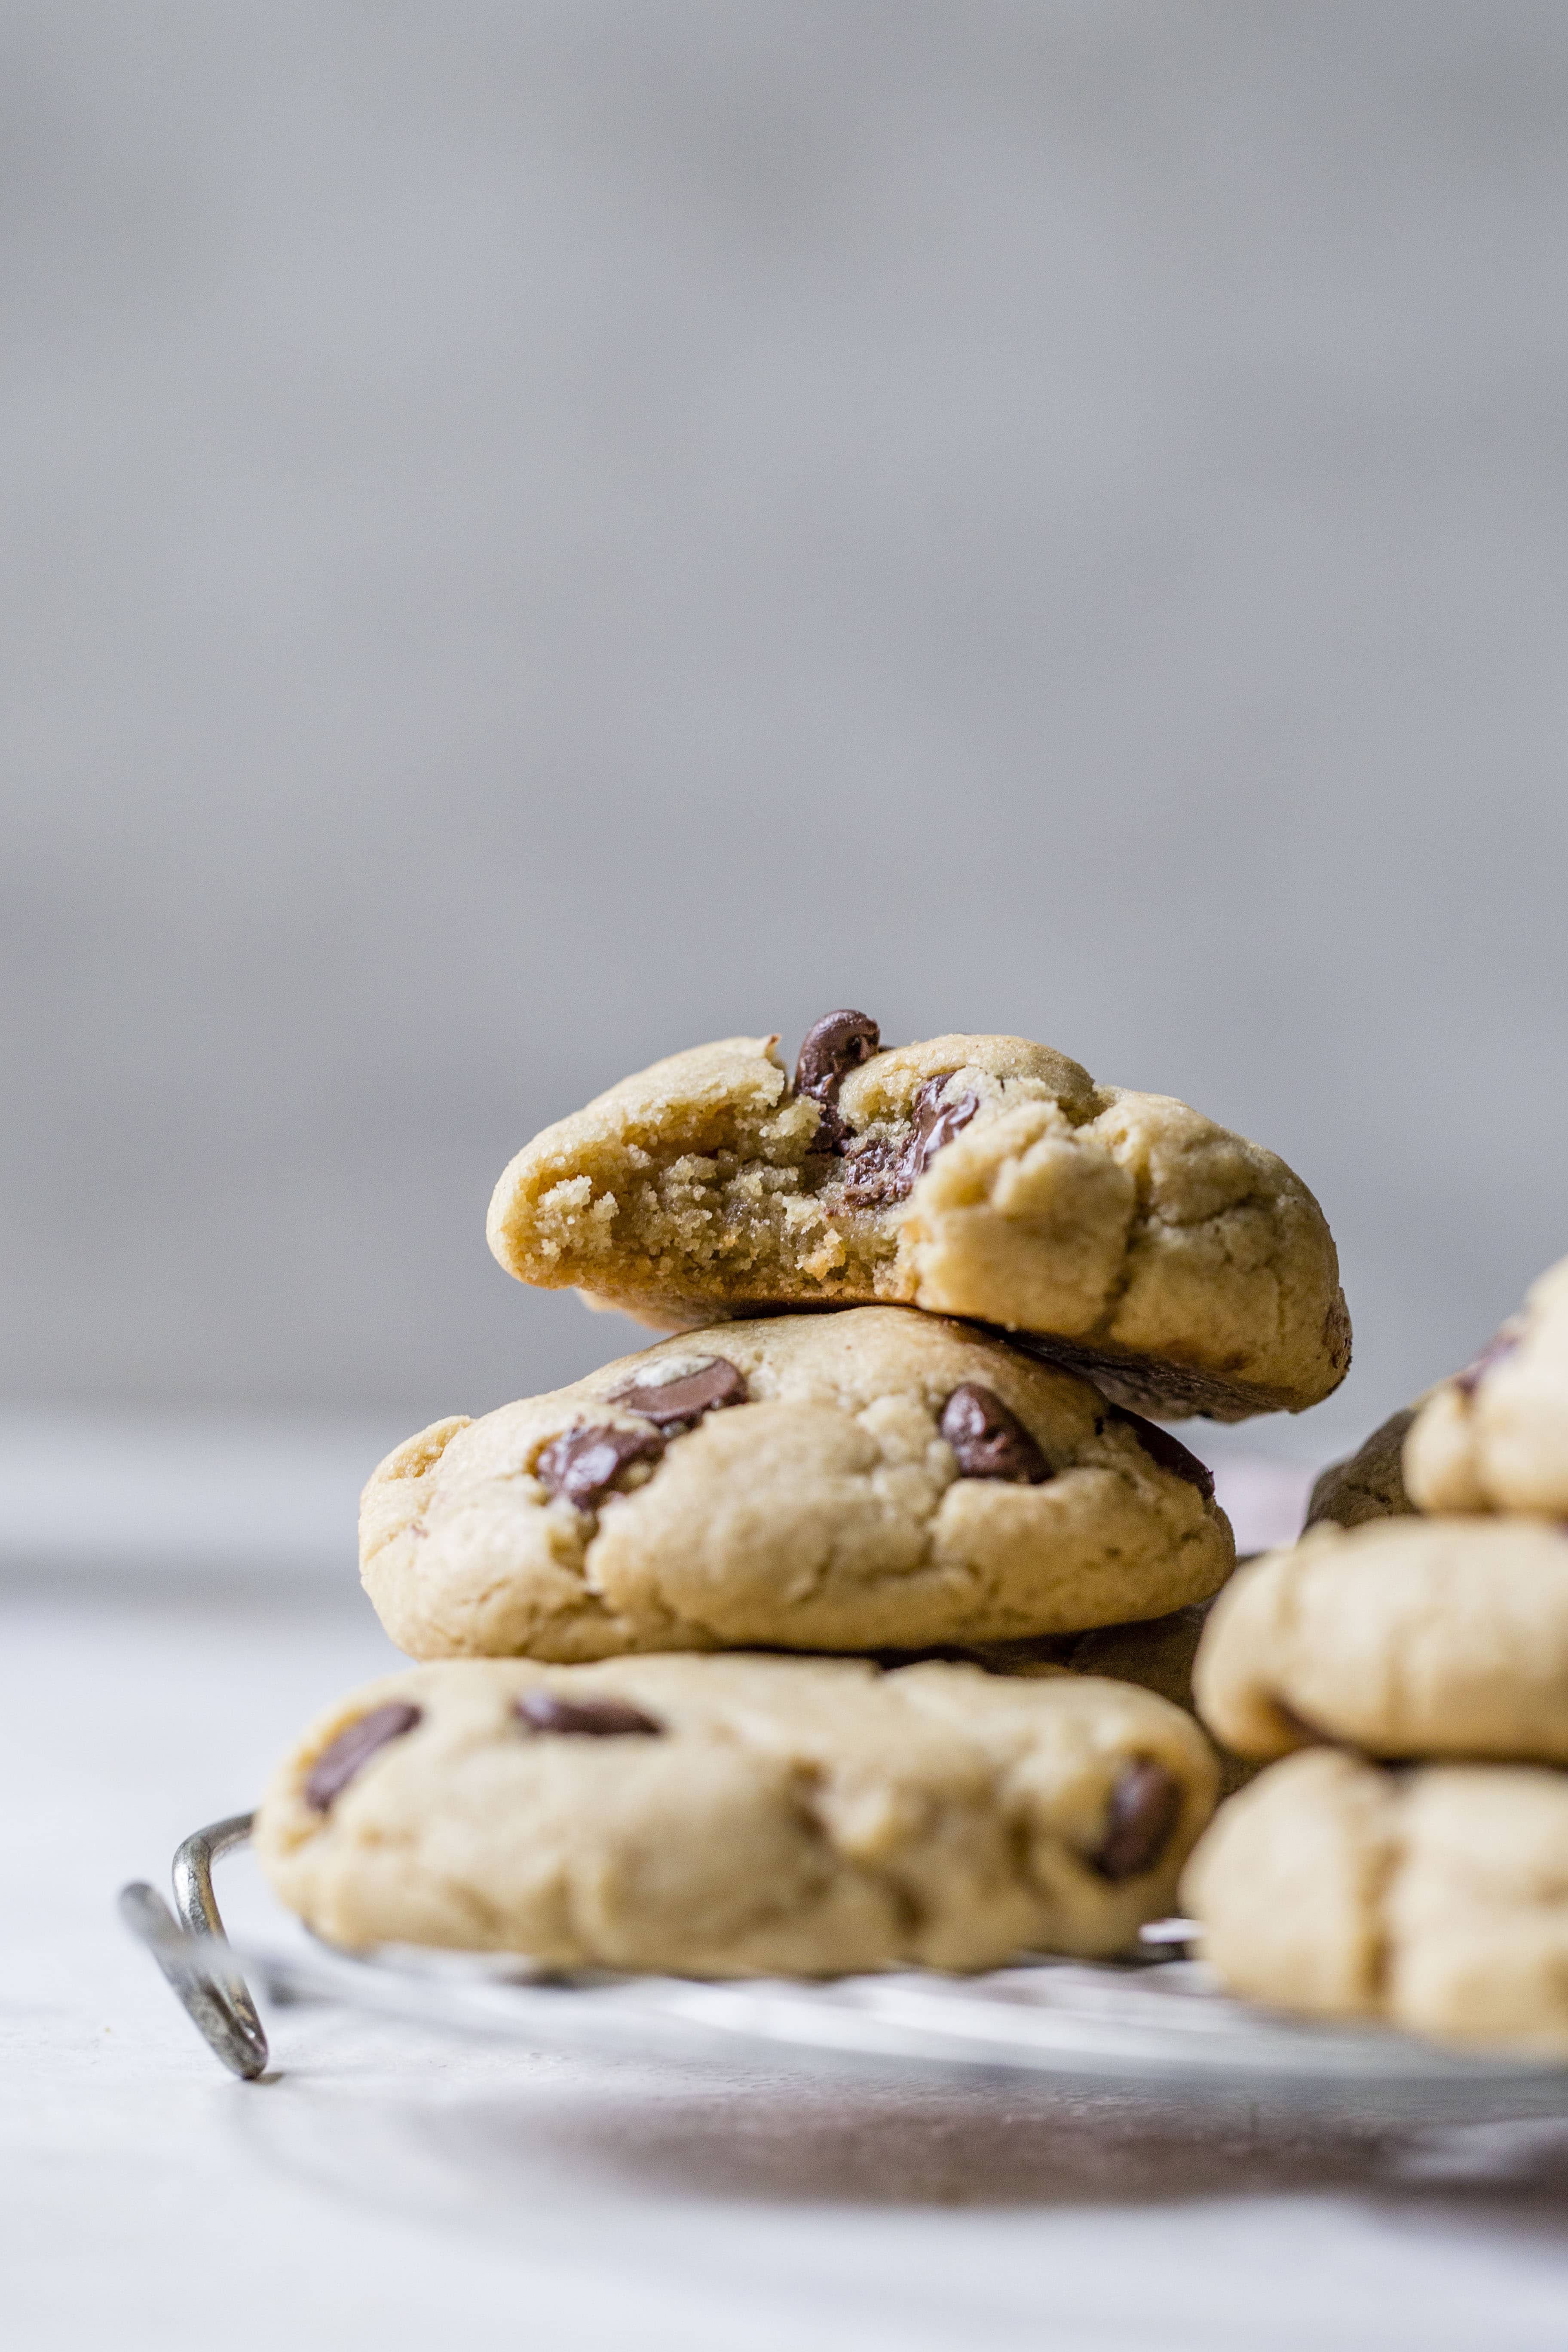 These puffy peanut butter cookies with chocolate chips are my most favorite peanut butter chocolate chip cookie ever! They are soft but also a little chewy and the combination is just to die for! Comes together super easily too. I howsweeteats.com #peanutbutter #cookies